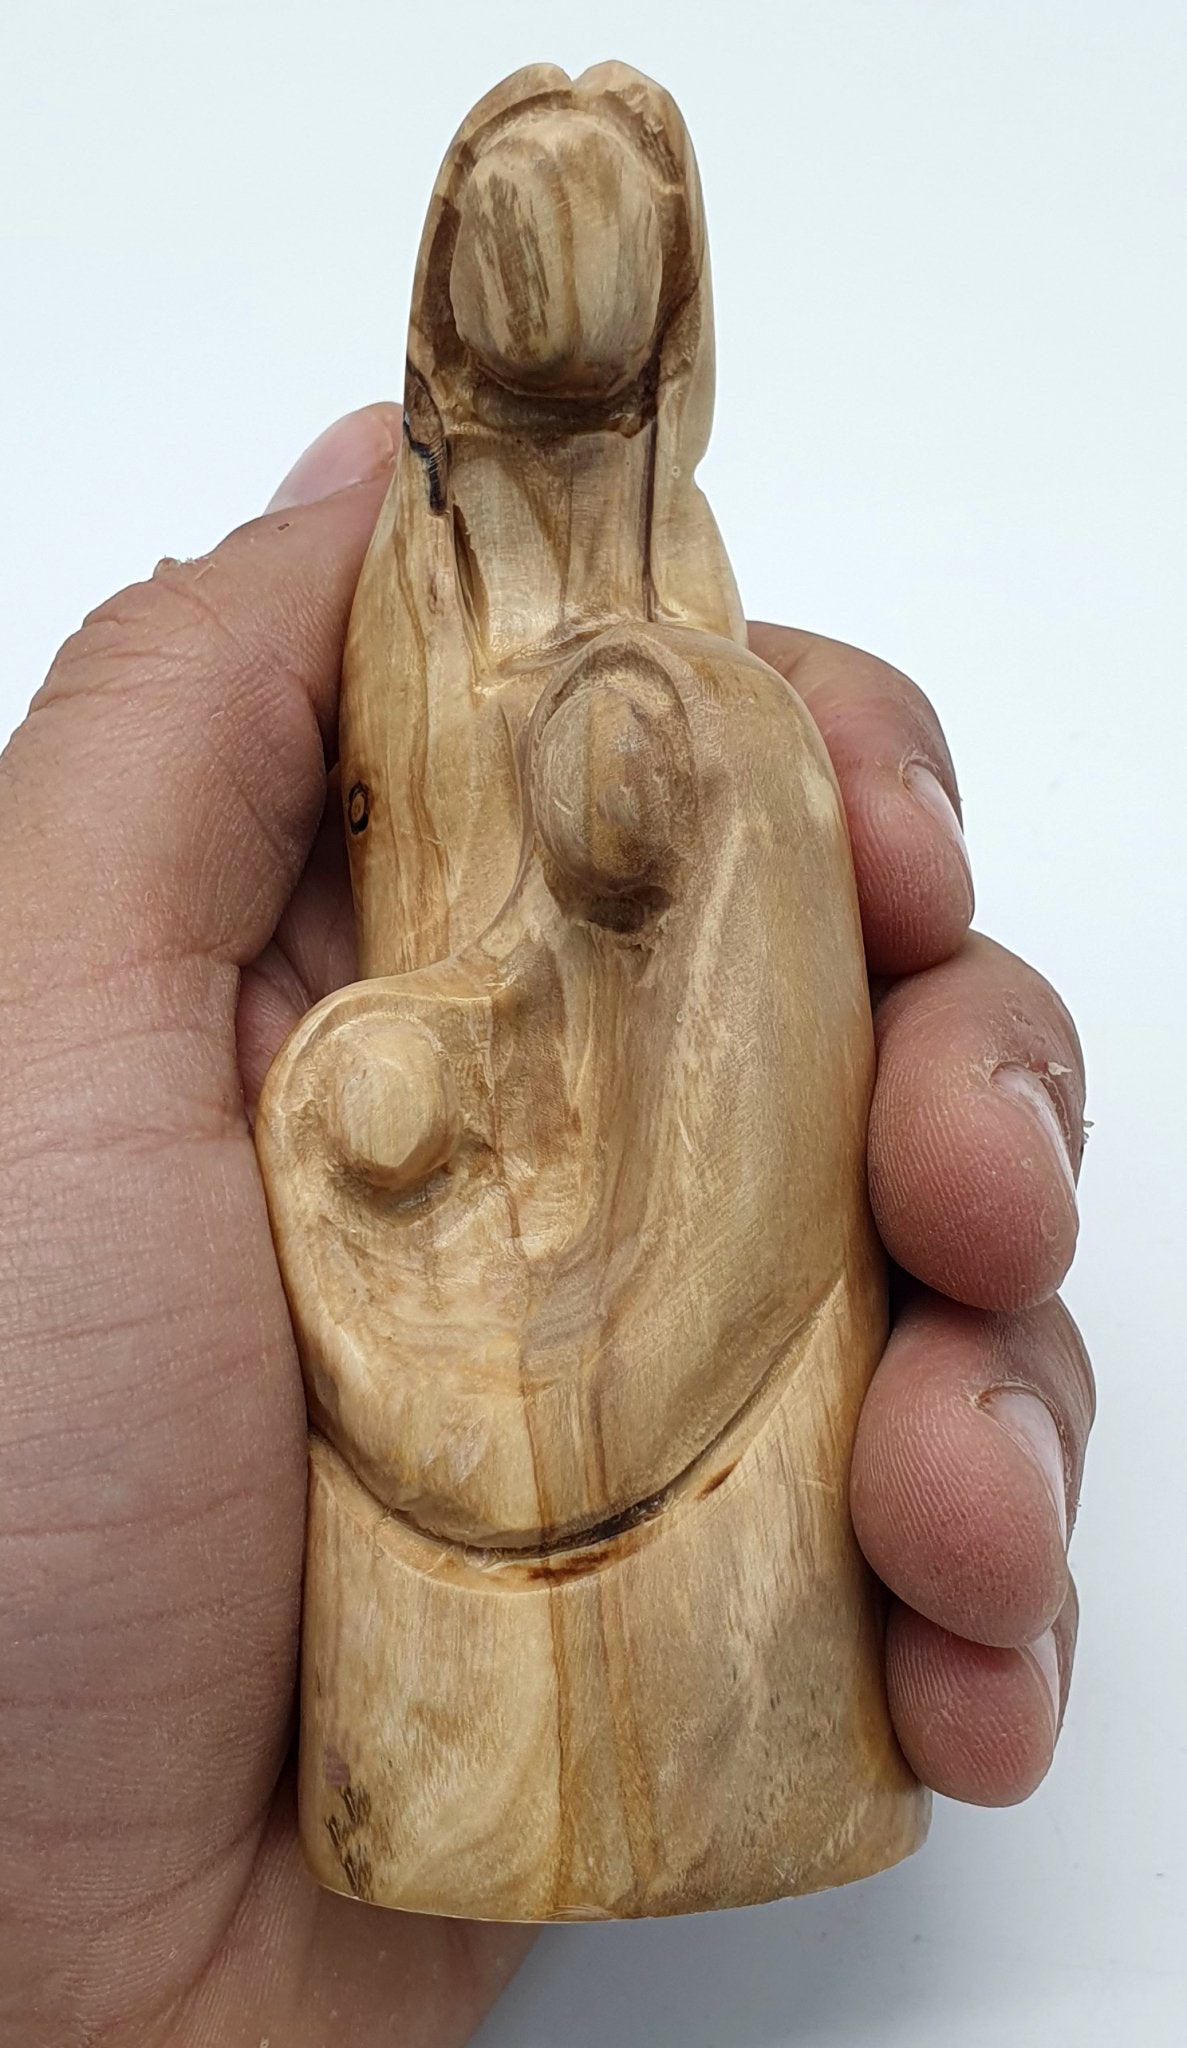 "Sacred Artistry: Zuluf Hand-Carved Olive Wood Holy Family Sculpture - 4.7 Inches | Christmas Gift - Mary and Joseph Figurines - Zuluf